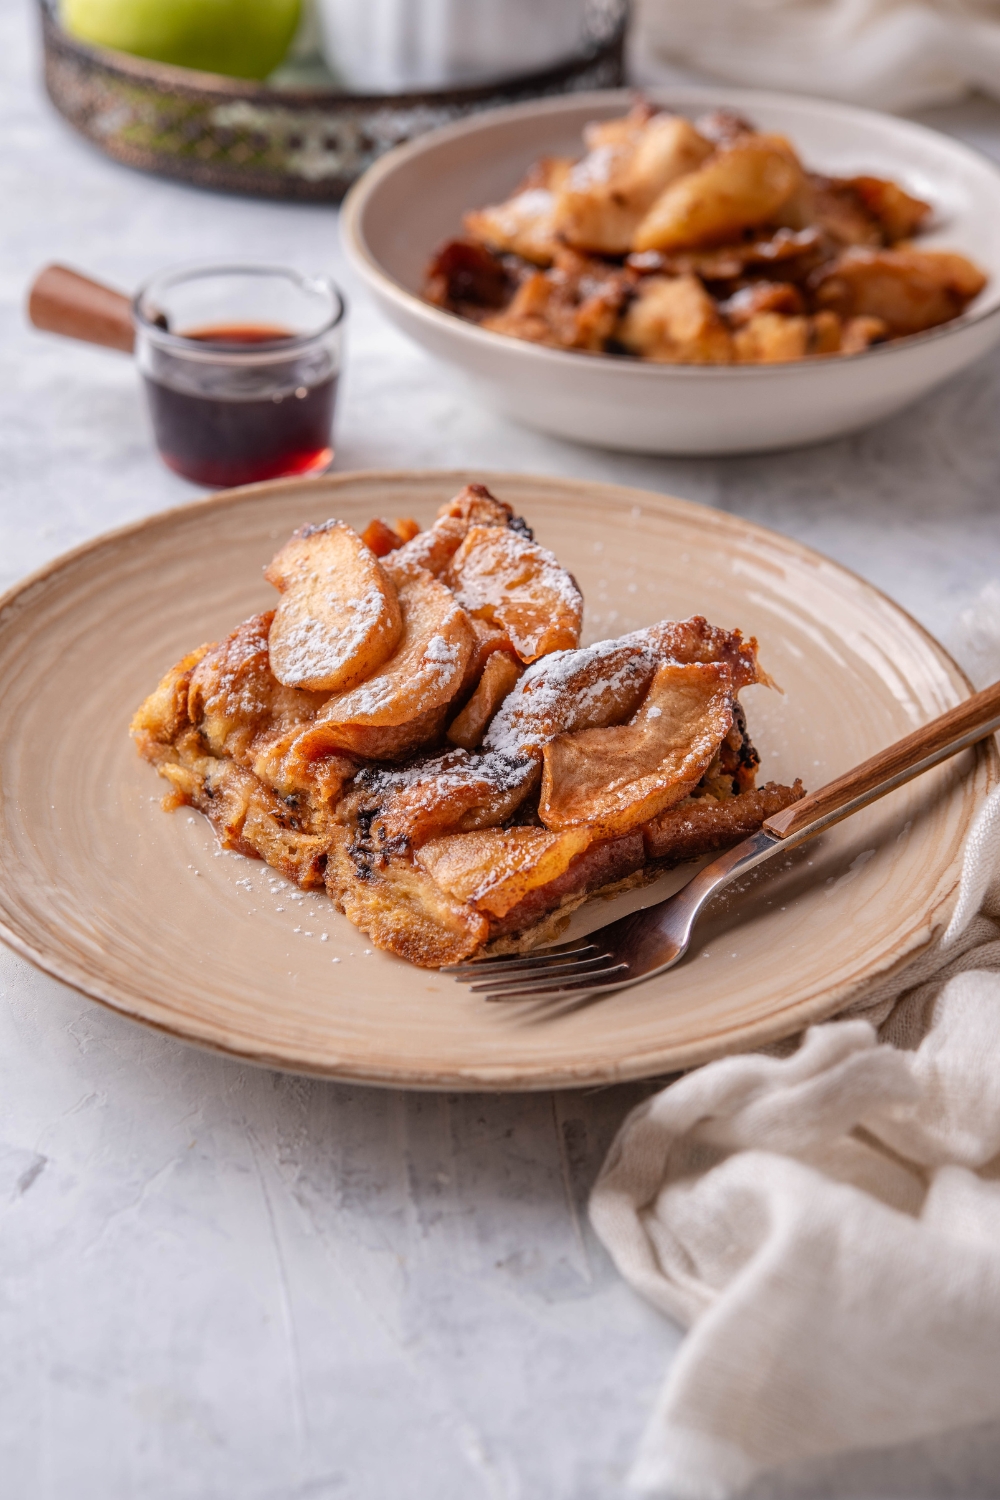 A serving of French toast covered in stewed apples and powdered sugar with a fork on the plate.